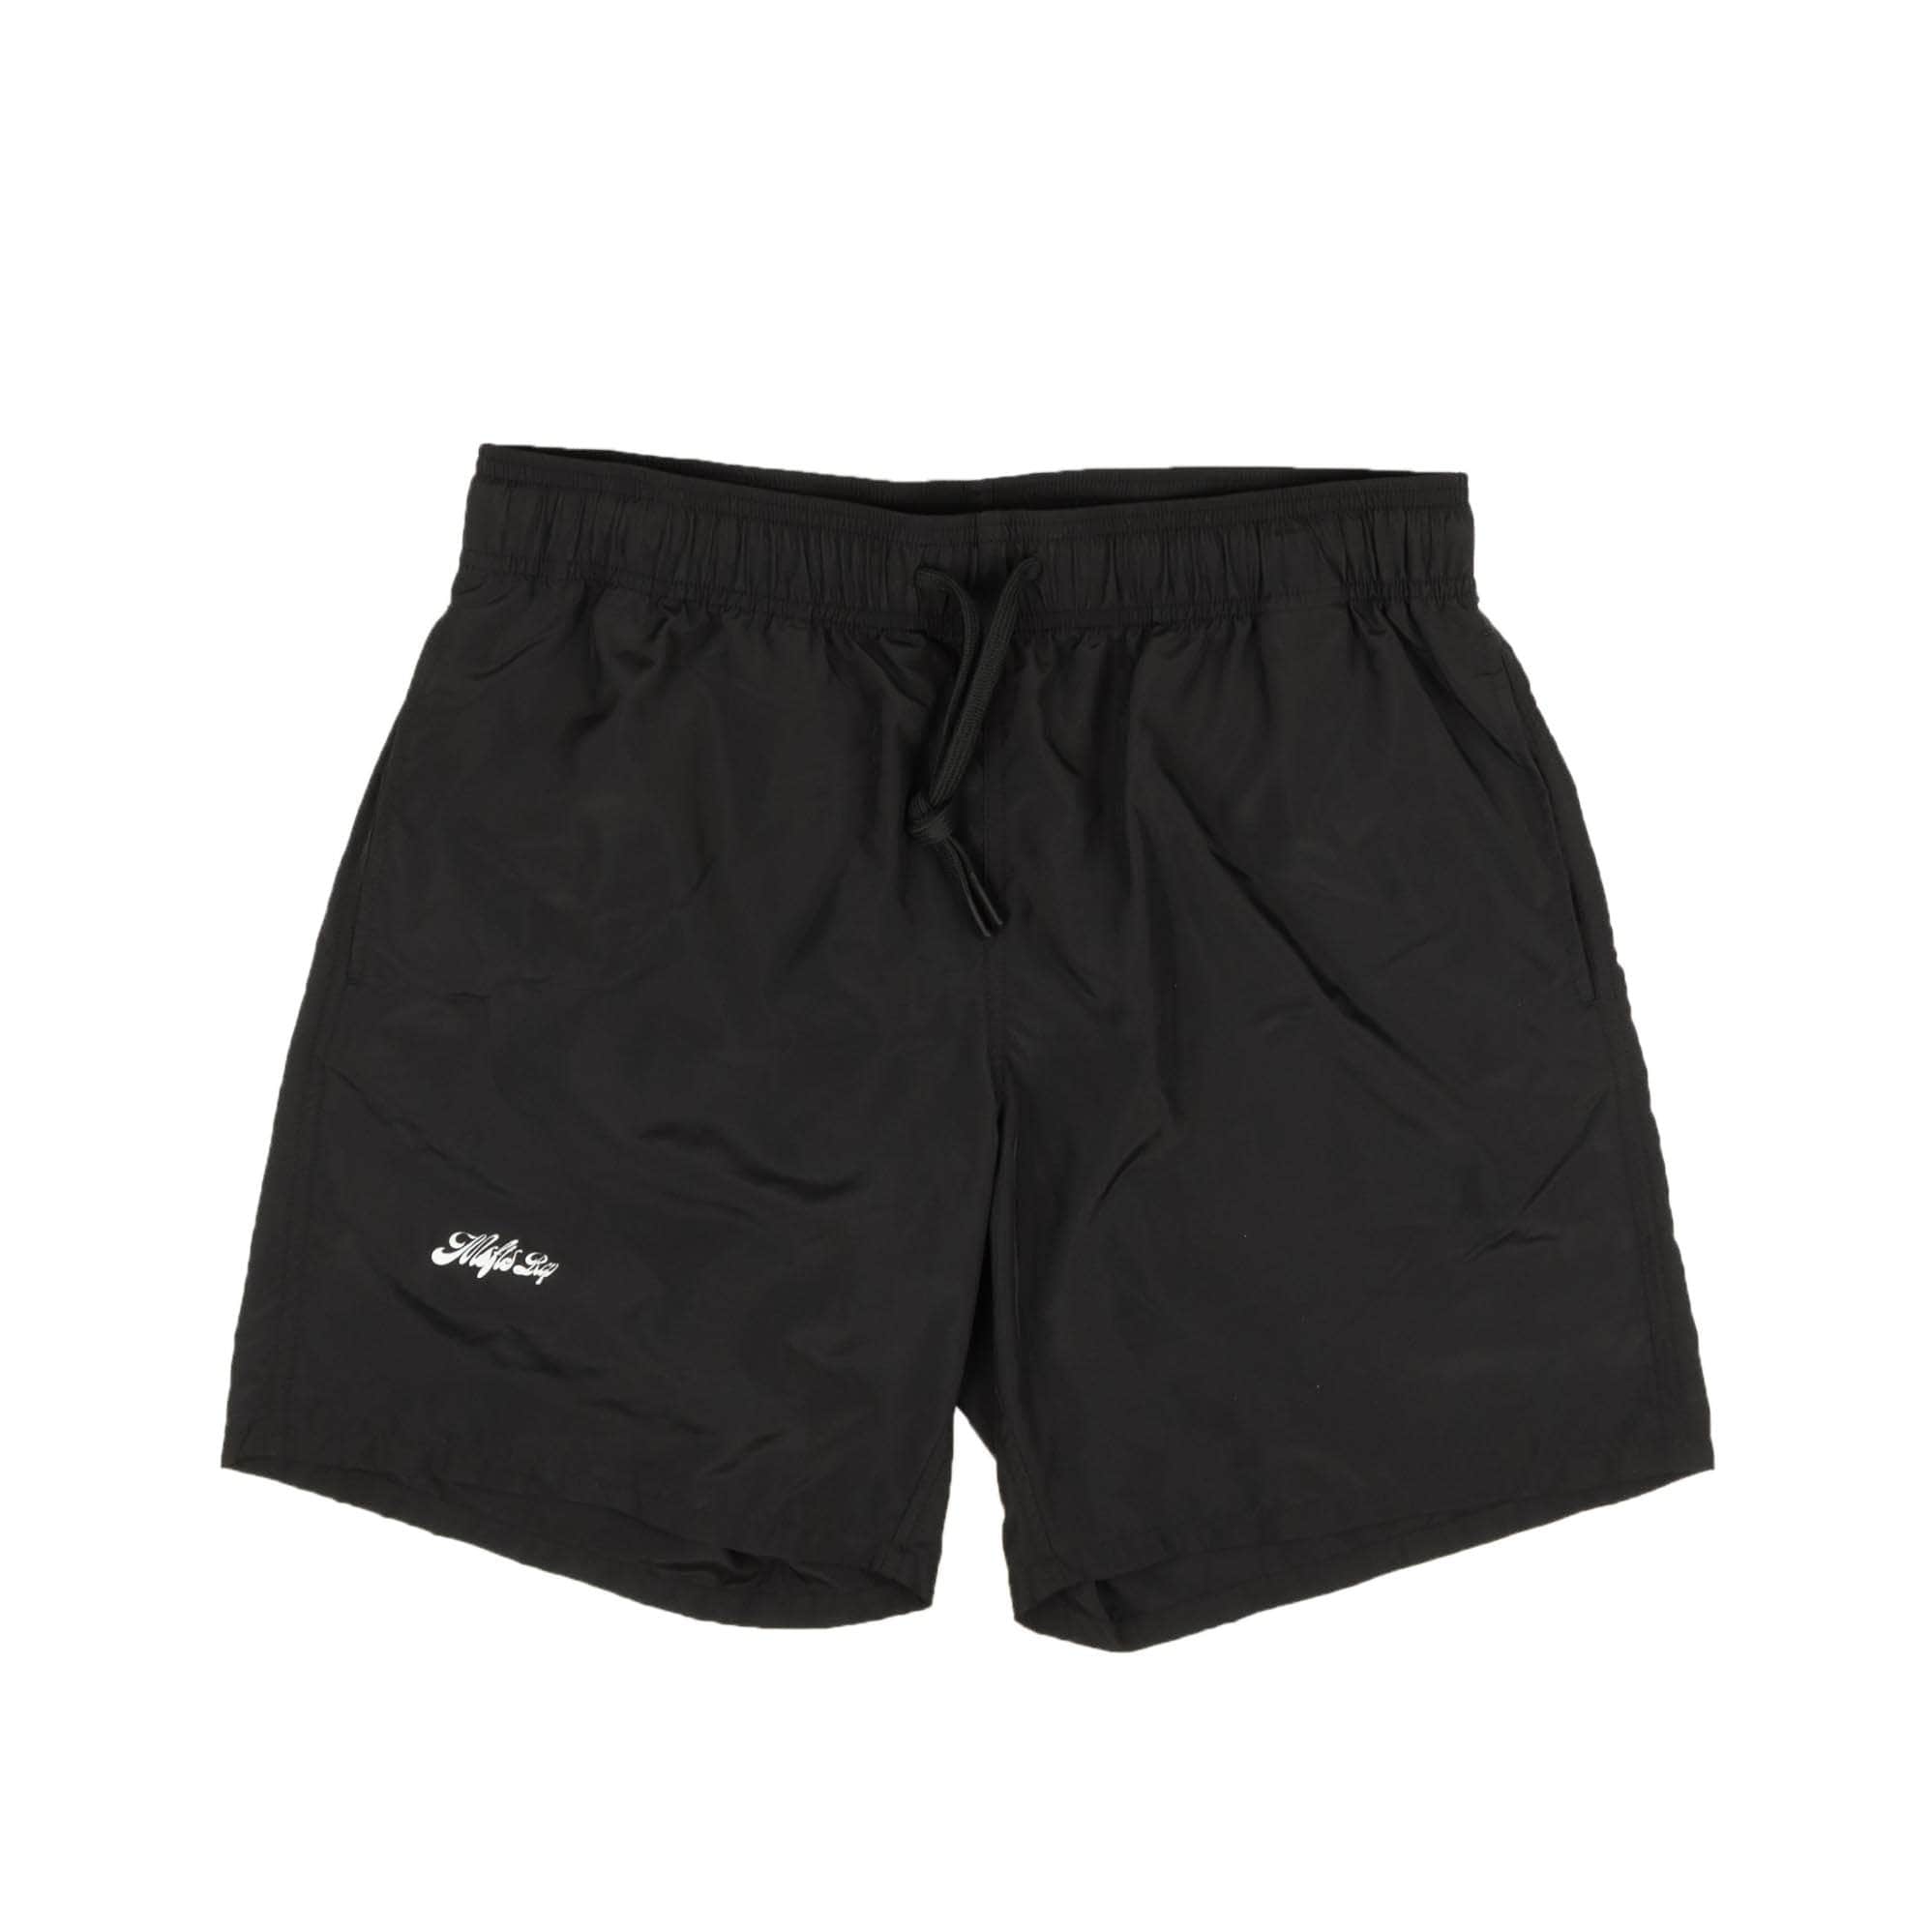 MSFTS Rep channelenable-all, chicmi, couponcollection, gender-mens, main-clothing, mens-shoes, MixedApparel, msfts-rep, size-l, size-m, size-s, under-250 Black Logo Swim Suit Shorts